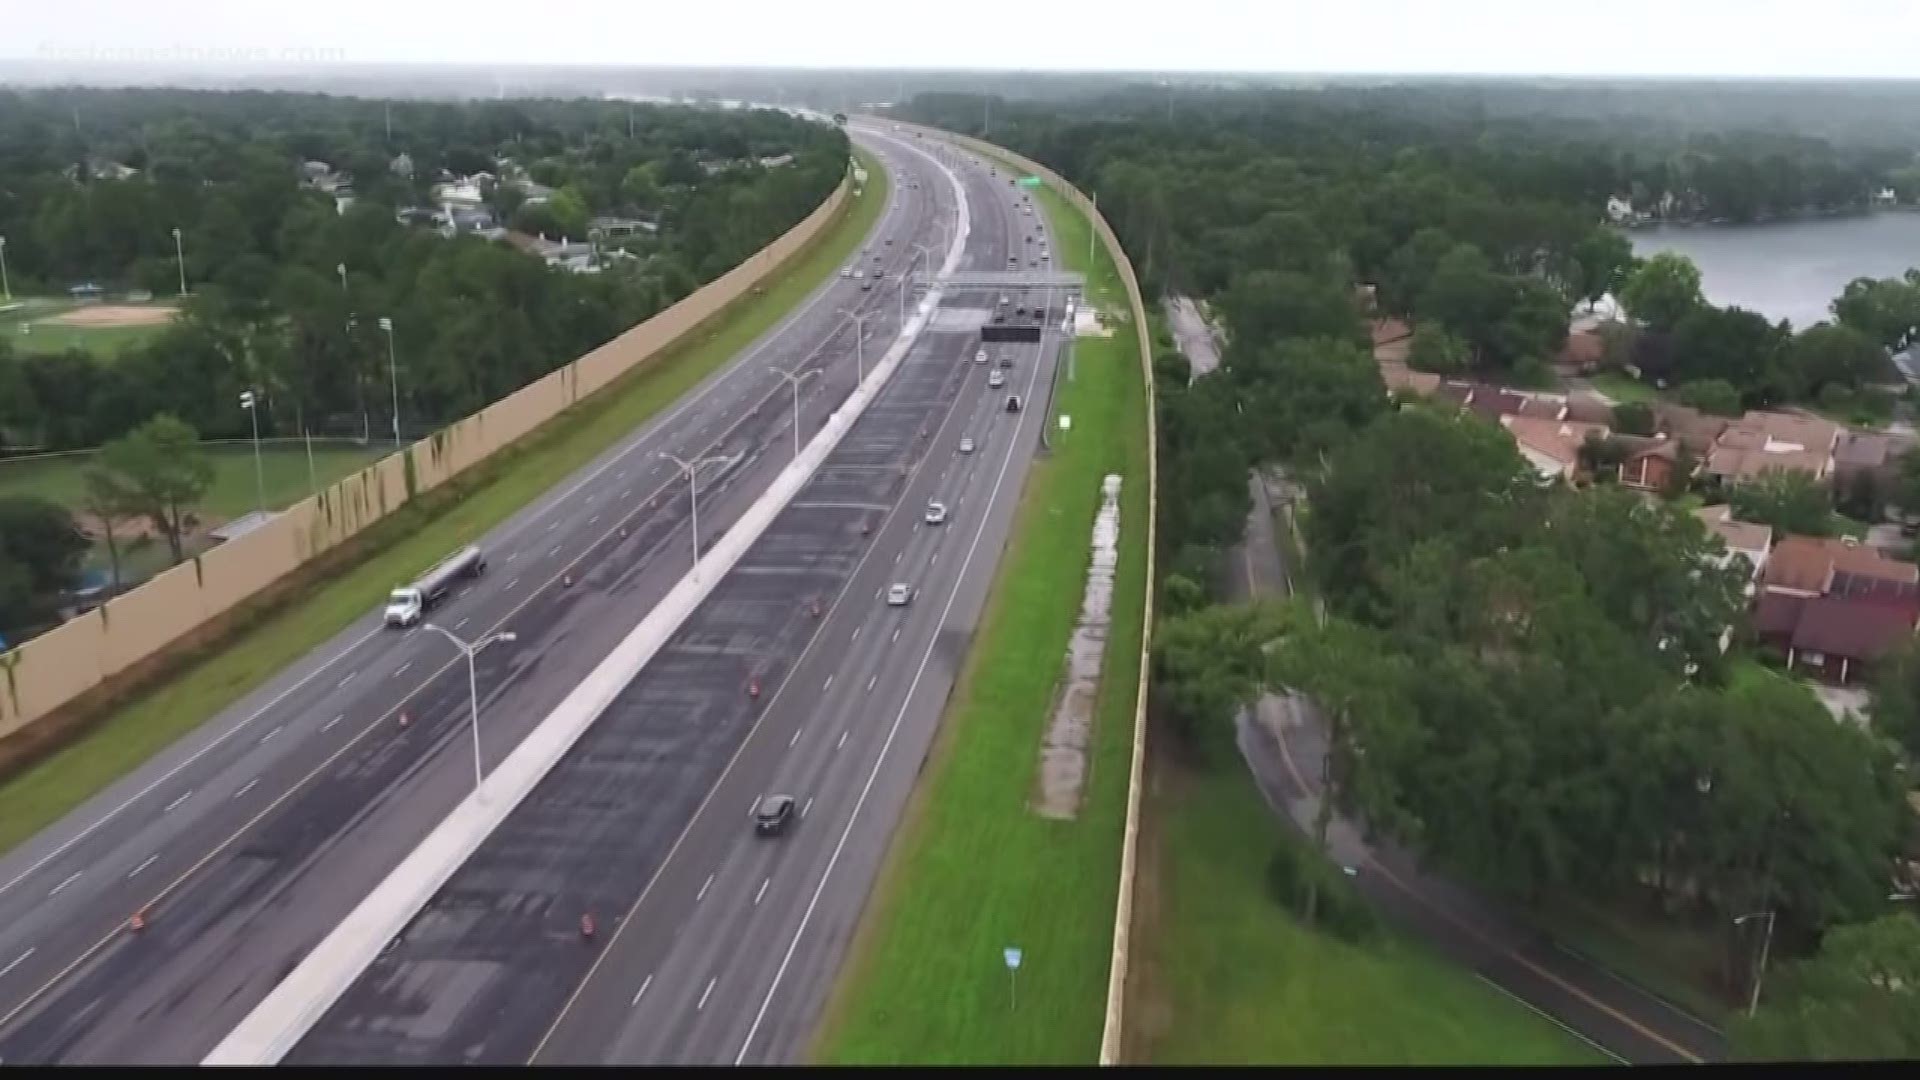 Rush hour tolls start at 50 cents but will increase as traffic increases.